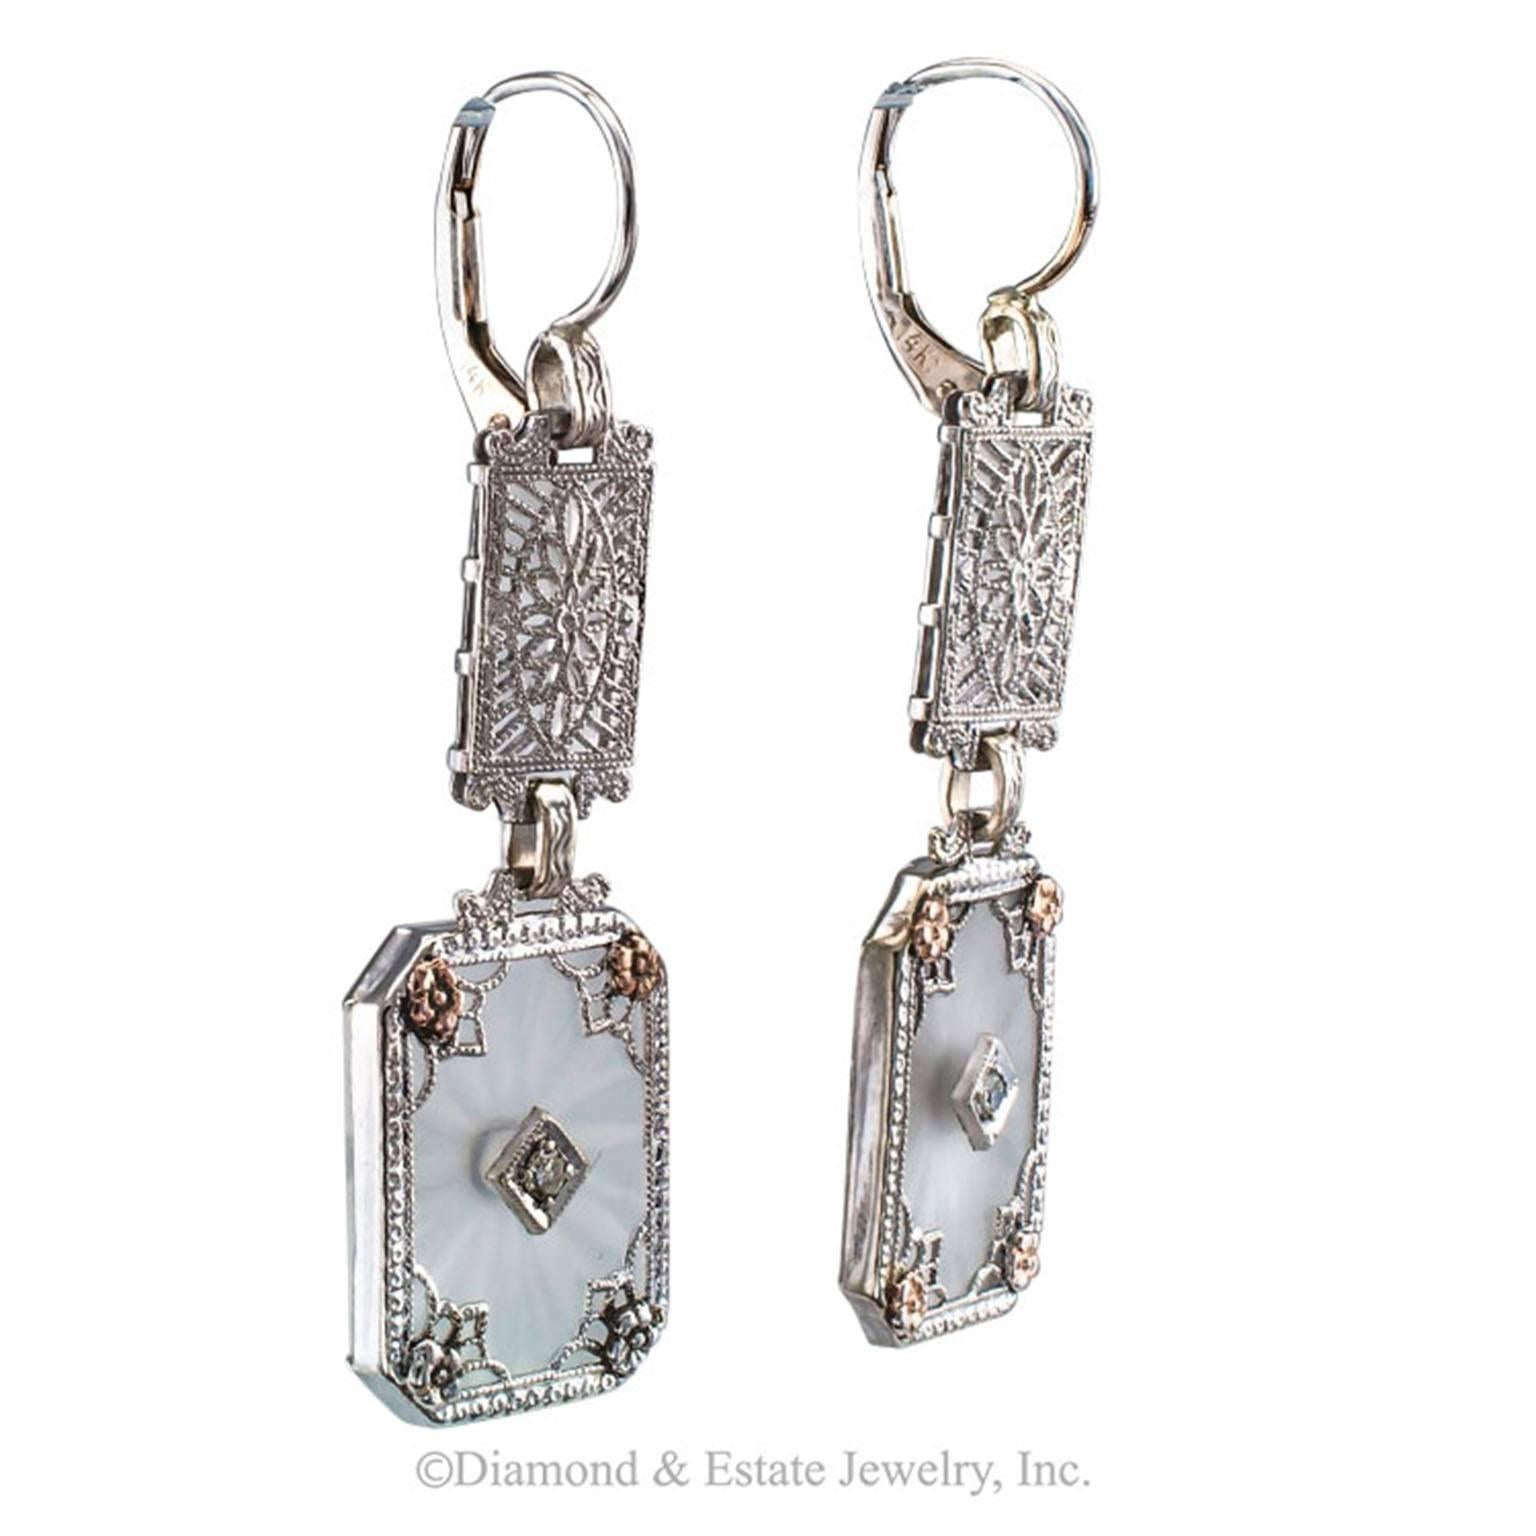 Art Deco Rock Crystal Diamond Gold Earrings

Art Deco rock crystal diamond gold filigree pendent earrings circa 1925.  The matching designs feature a pair of rock crystal plaques carved on the back and frosted on the front, each studded with a